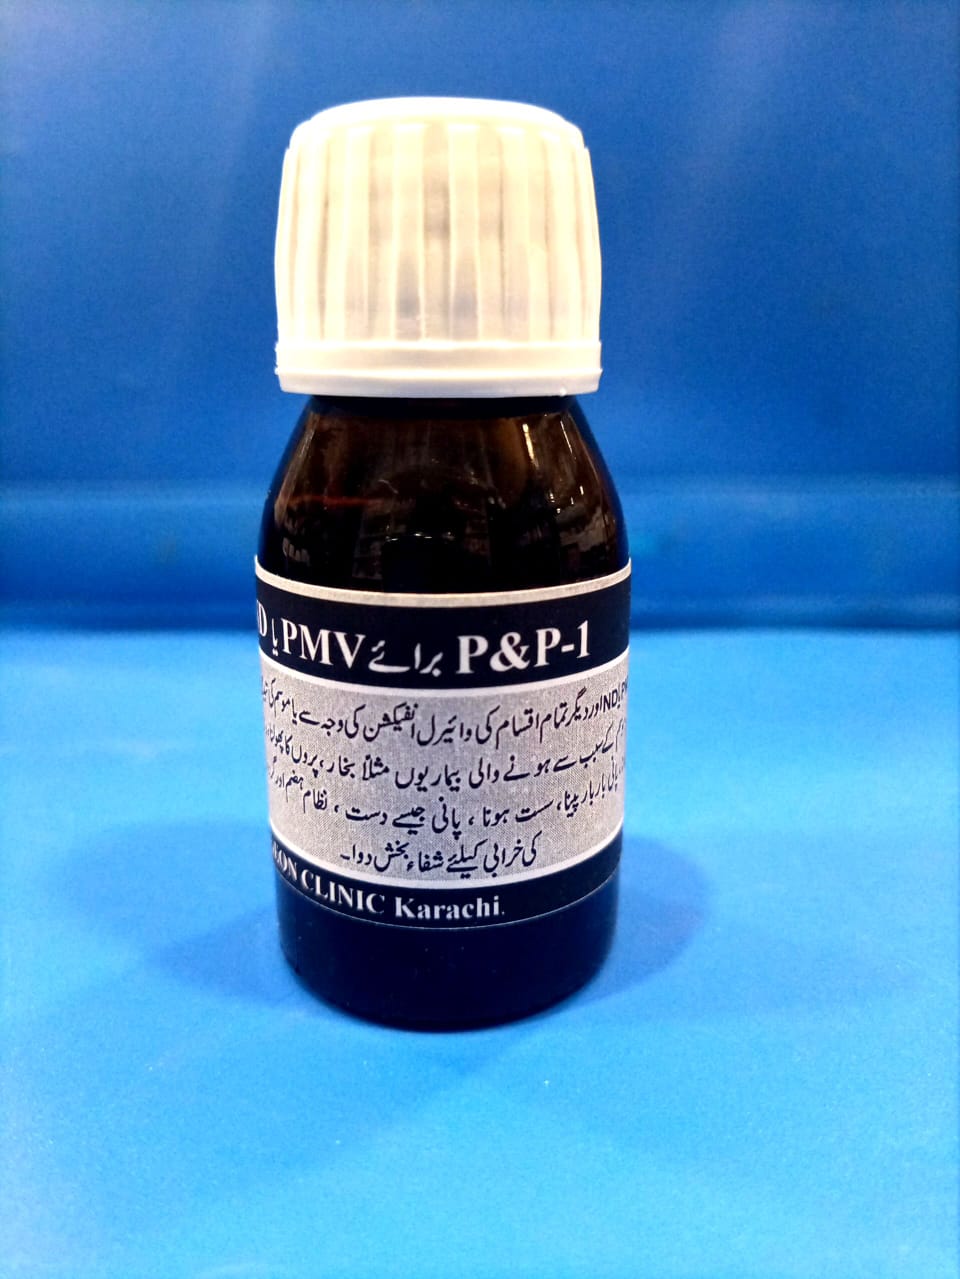 P&P-1 (for PMV and ND Viral Infection)